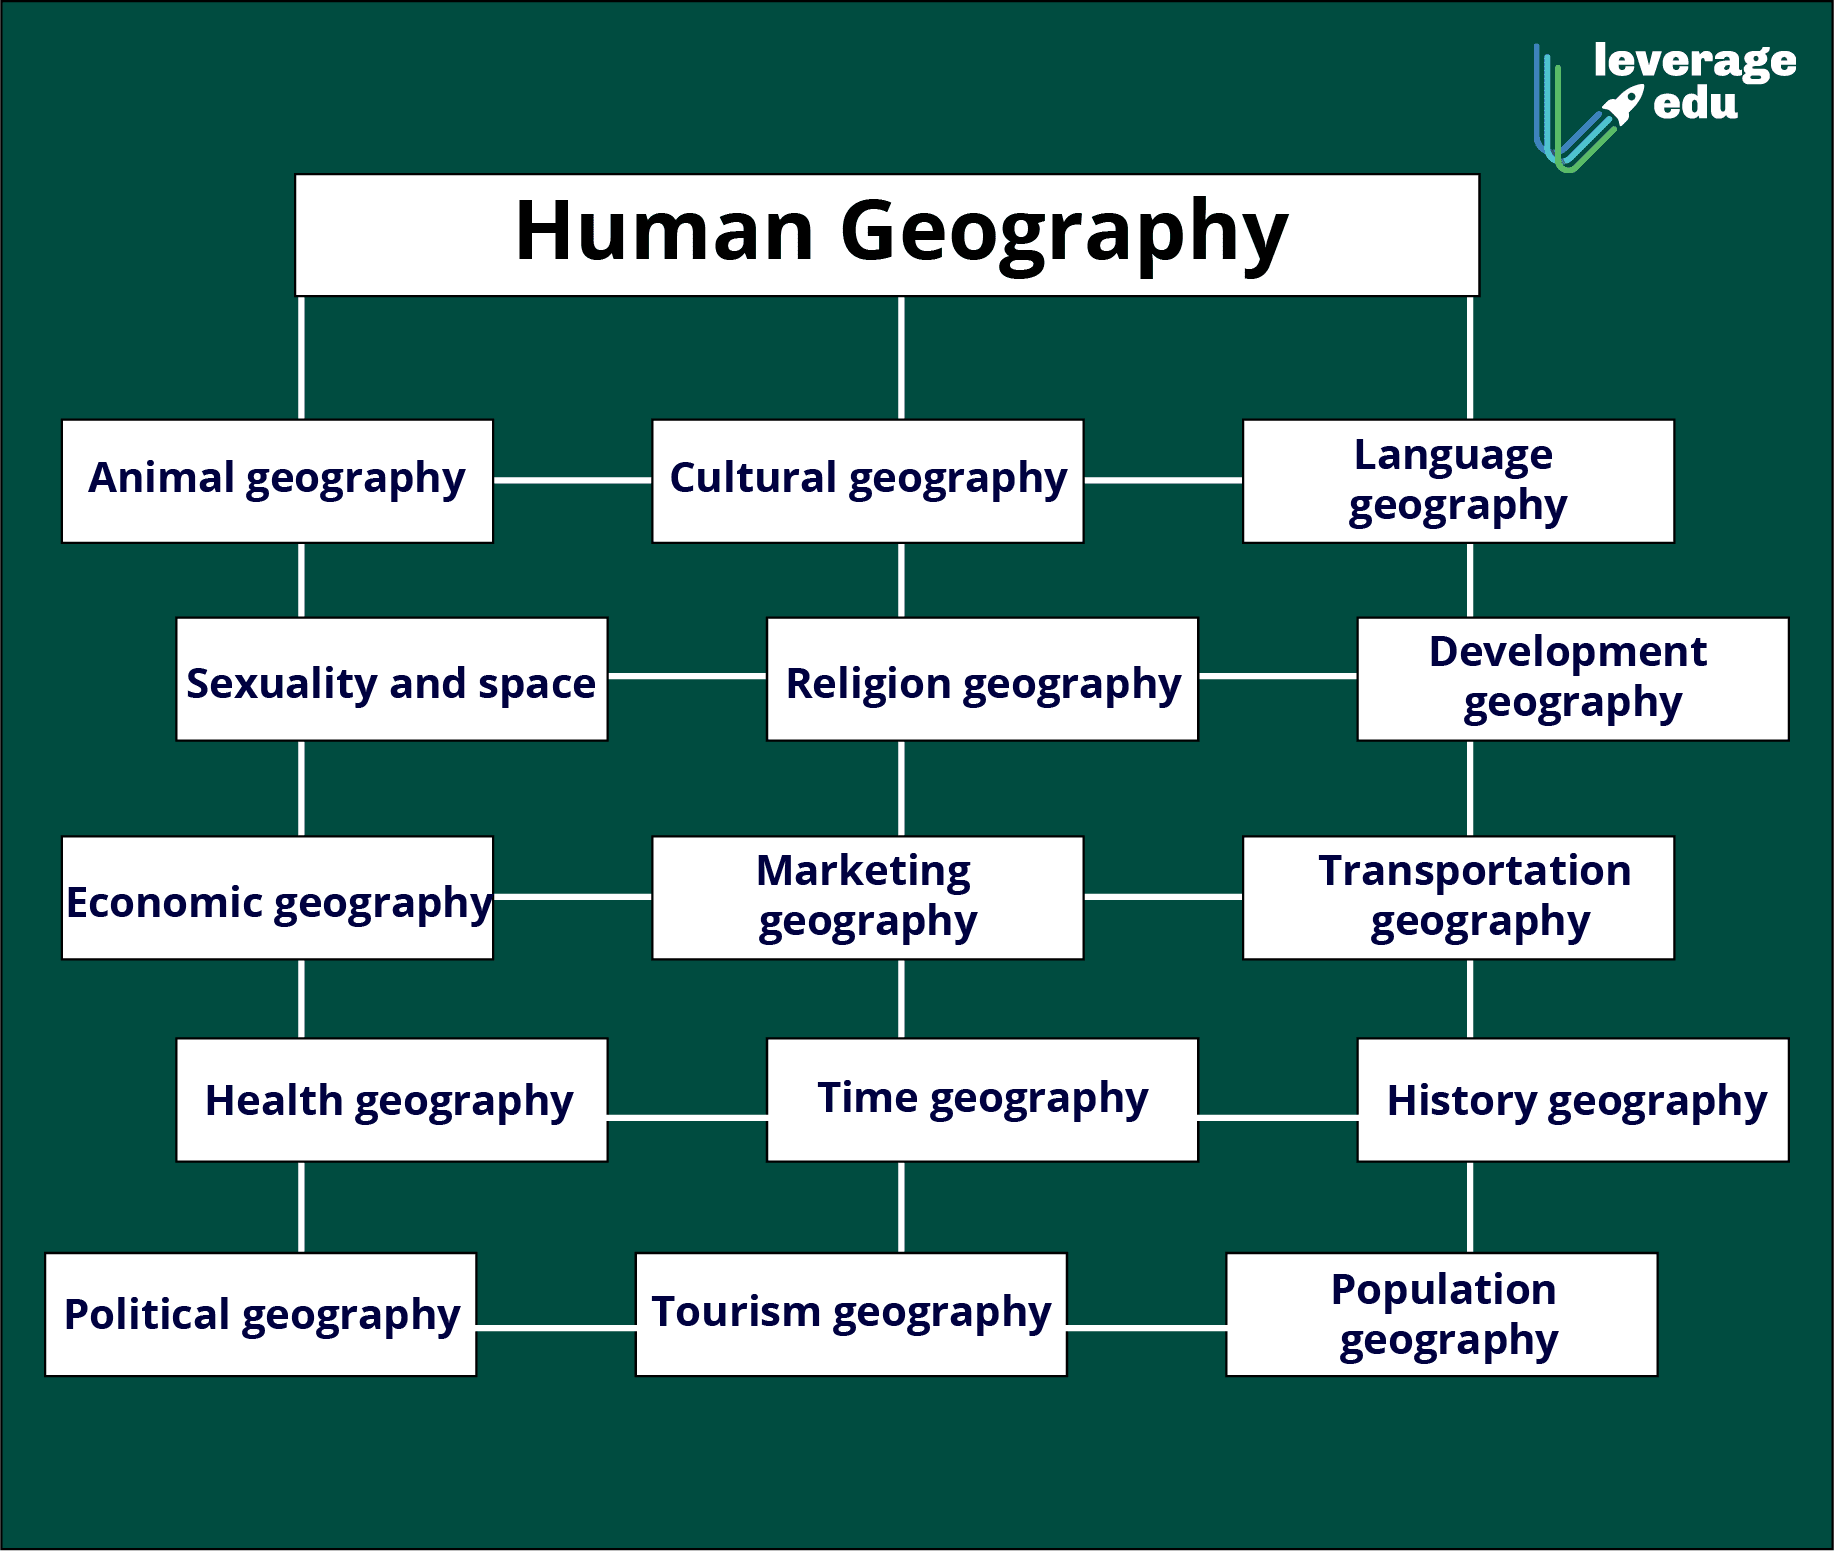 Branches of Geography